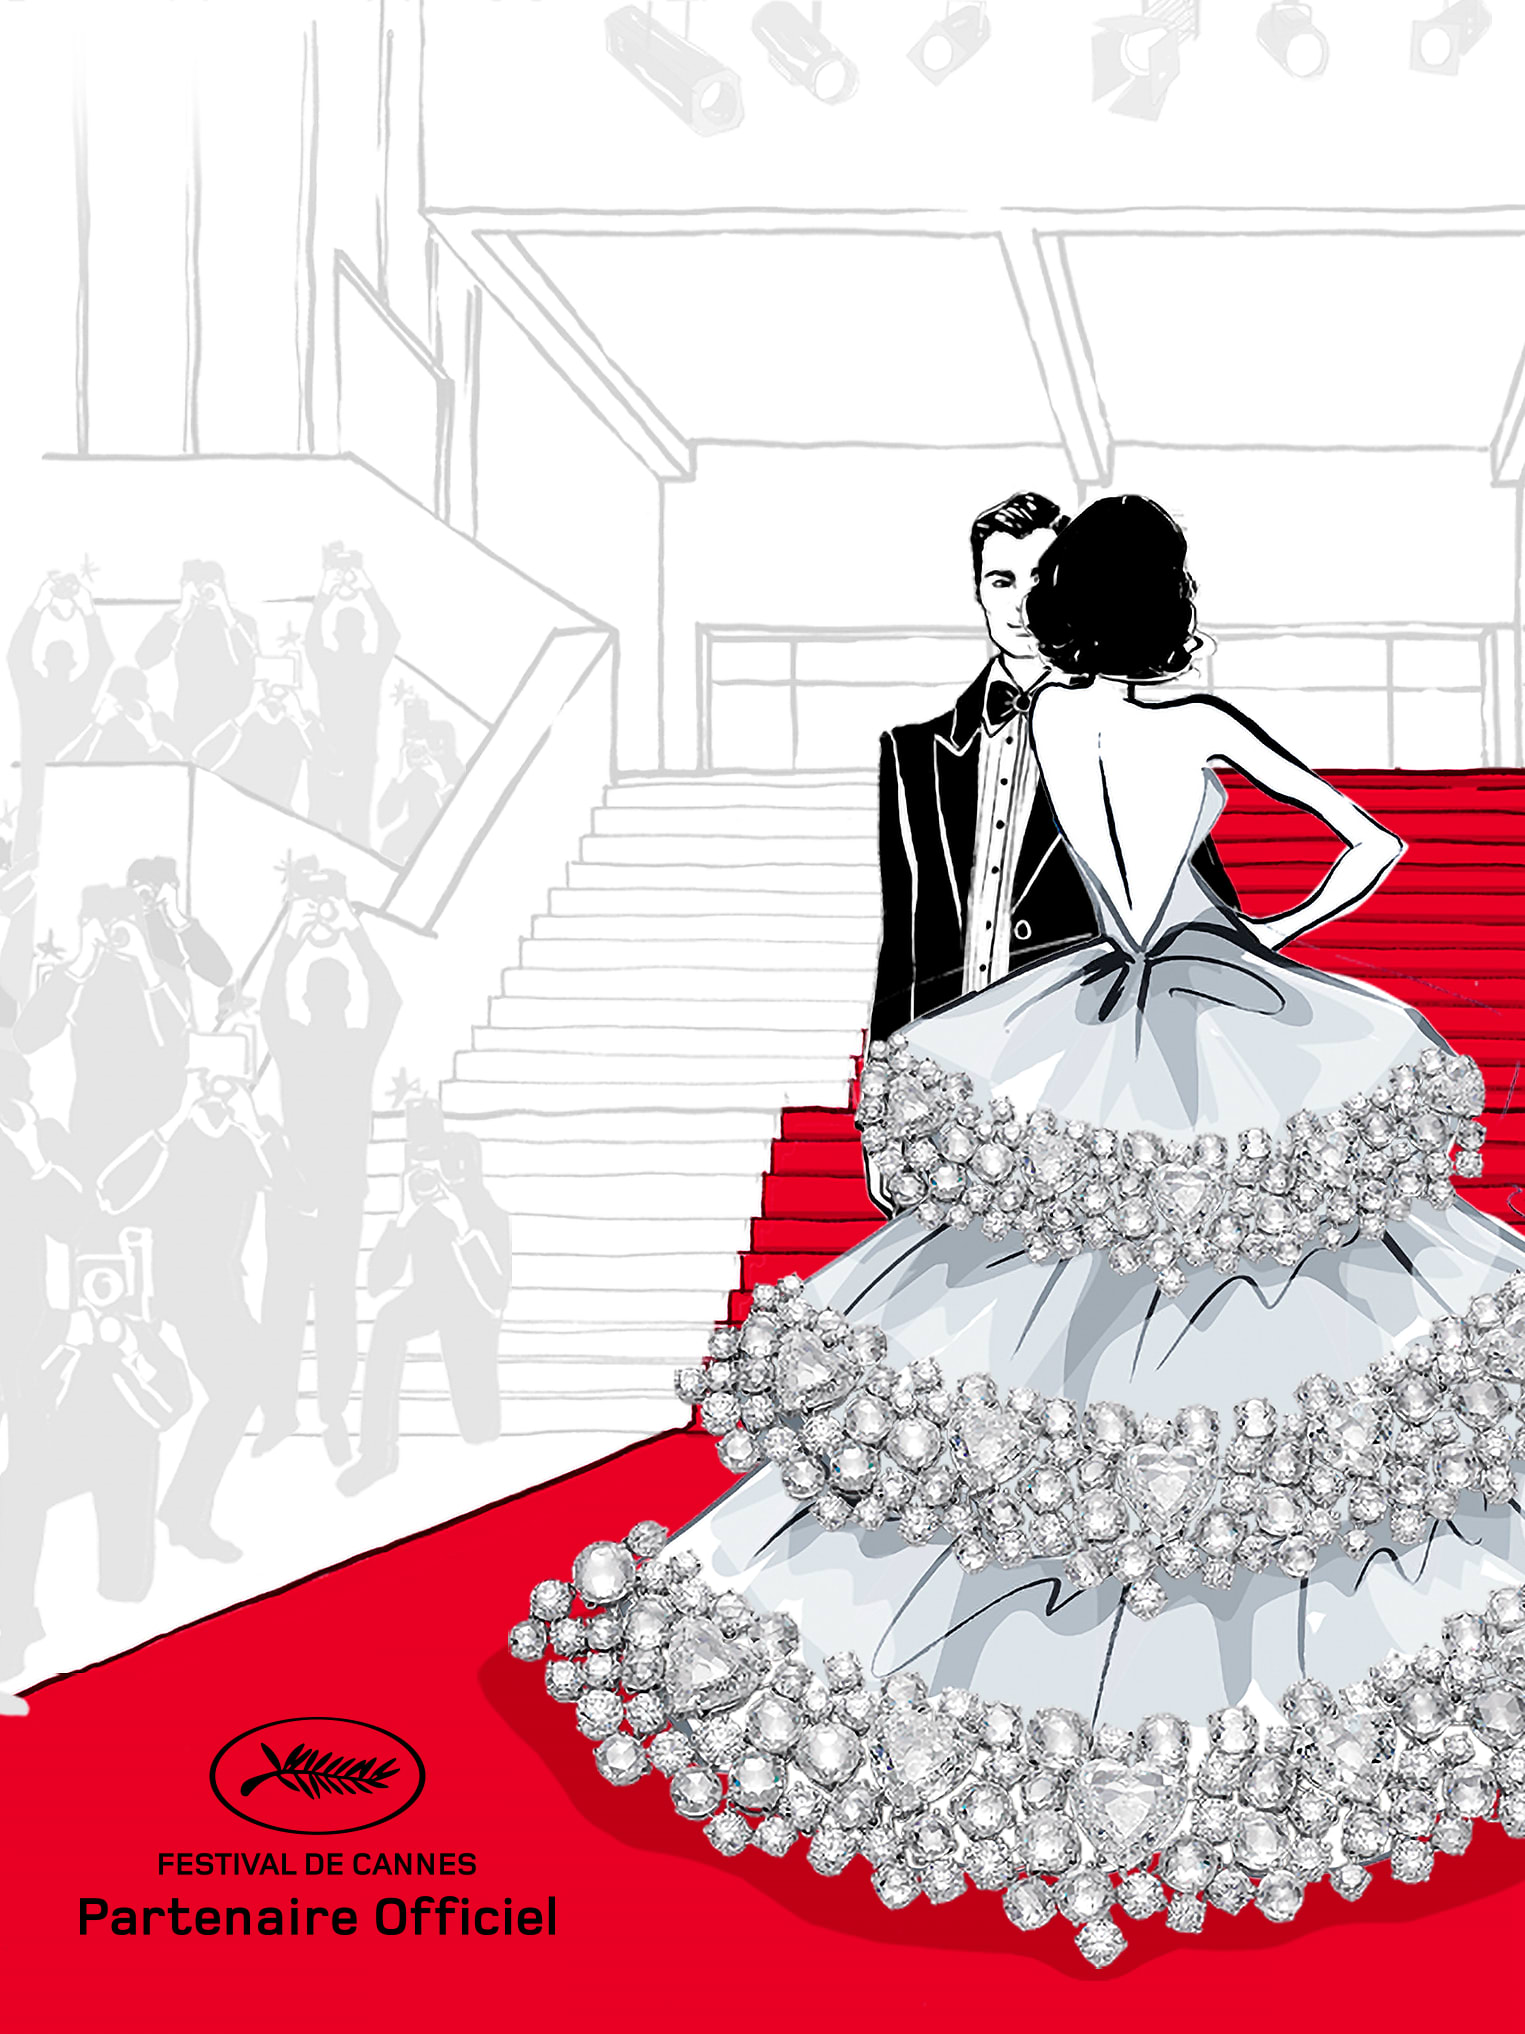 Sketch of couple walking the red carpet at the Cannes film festival